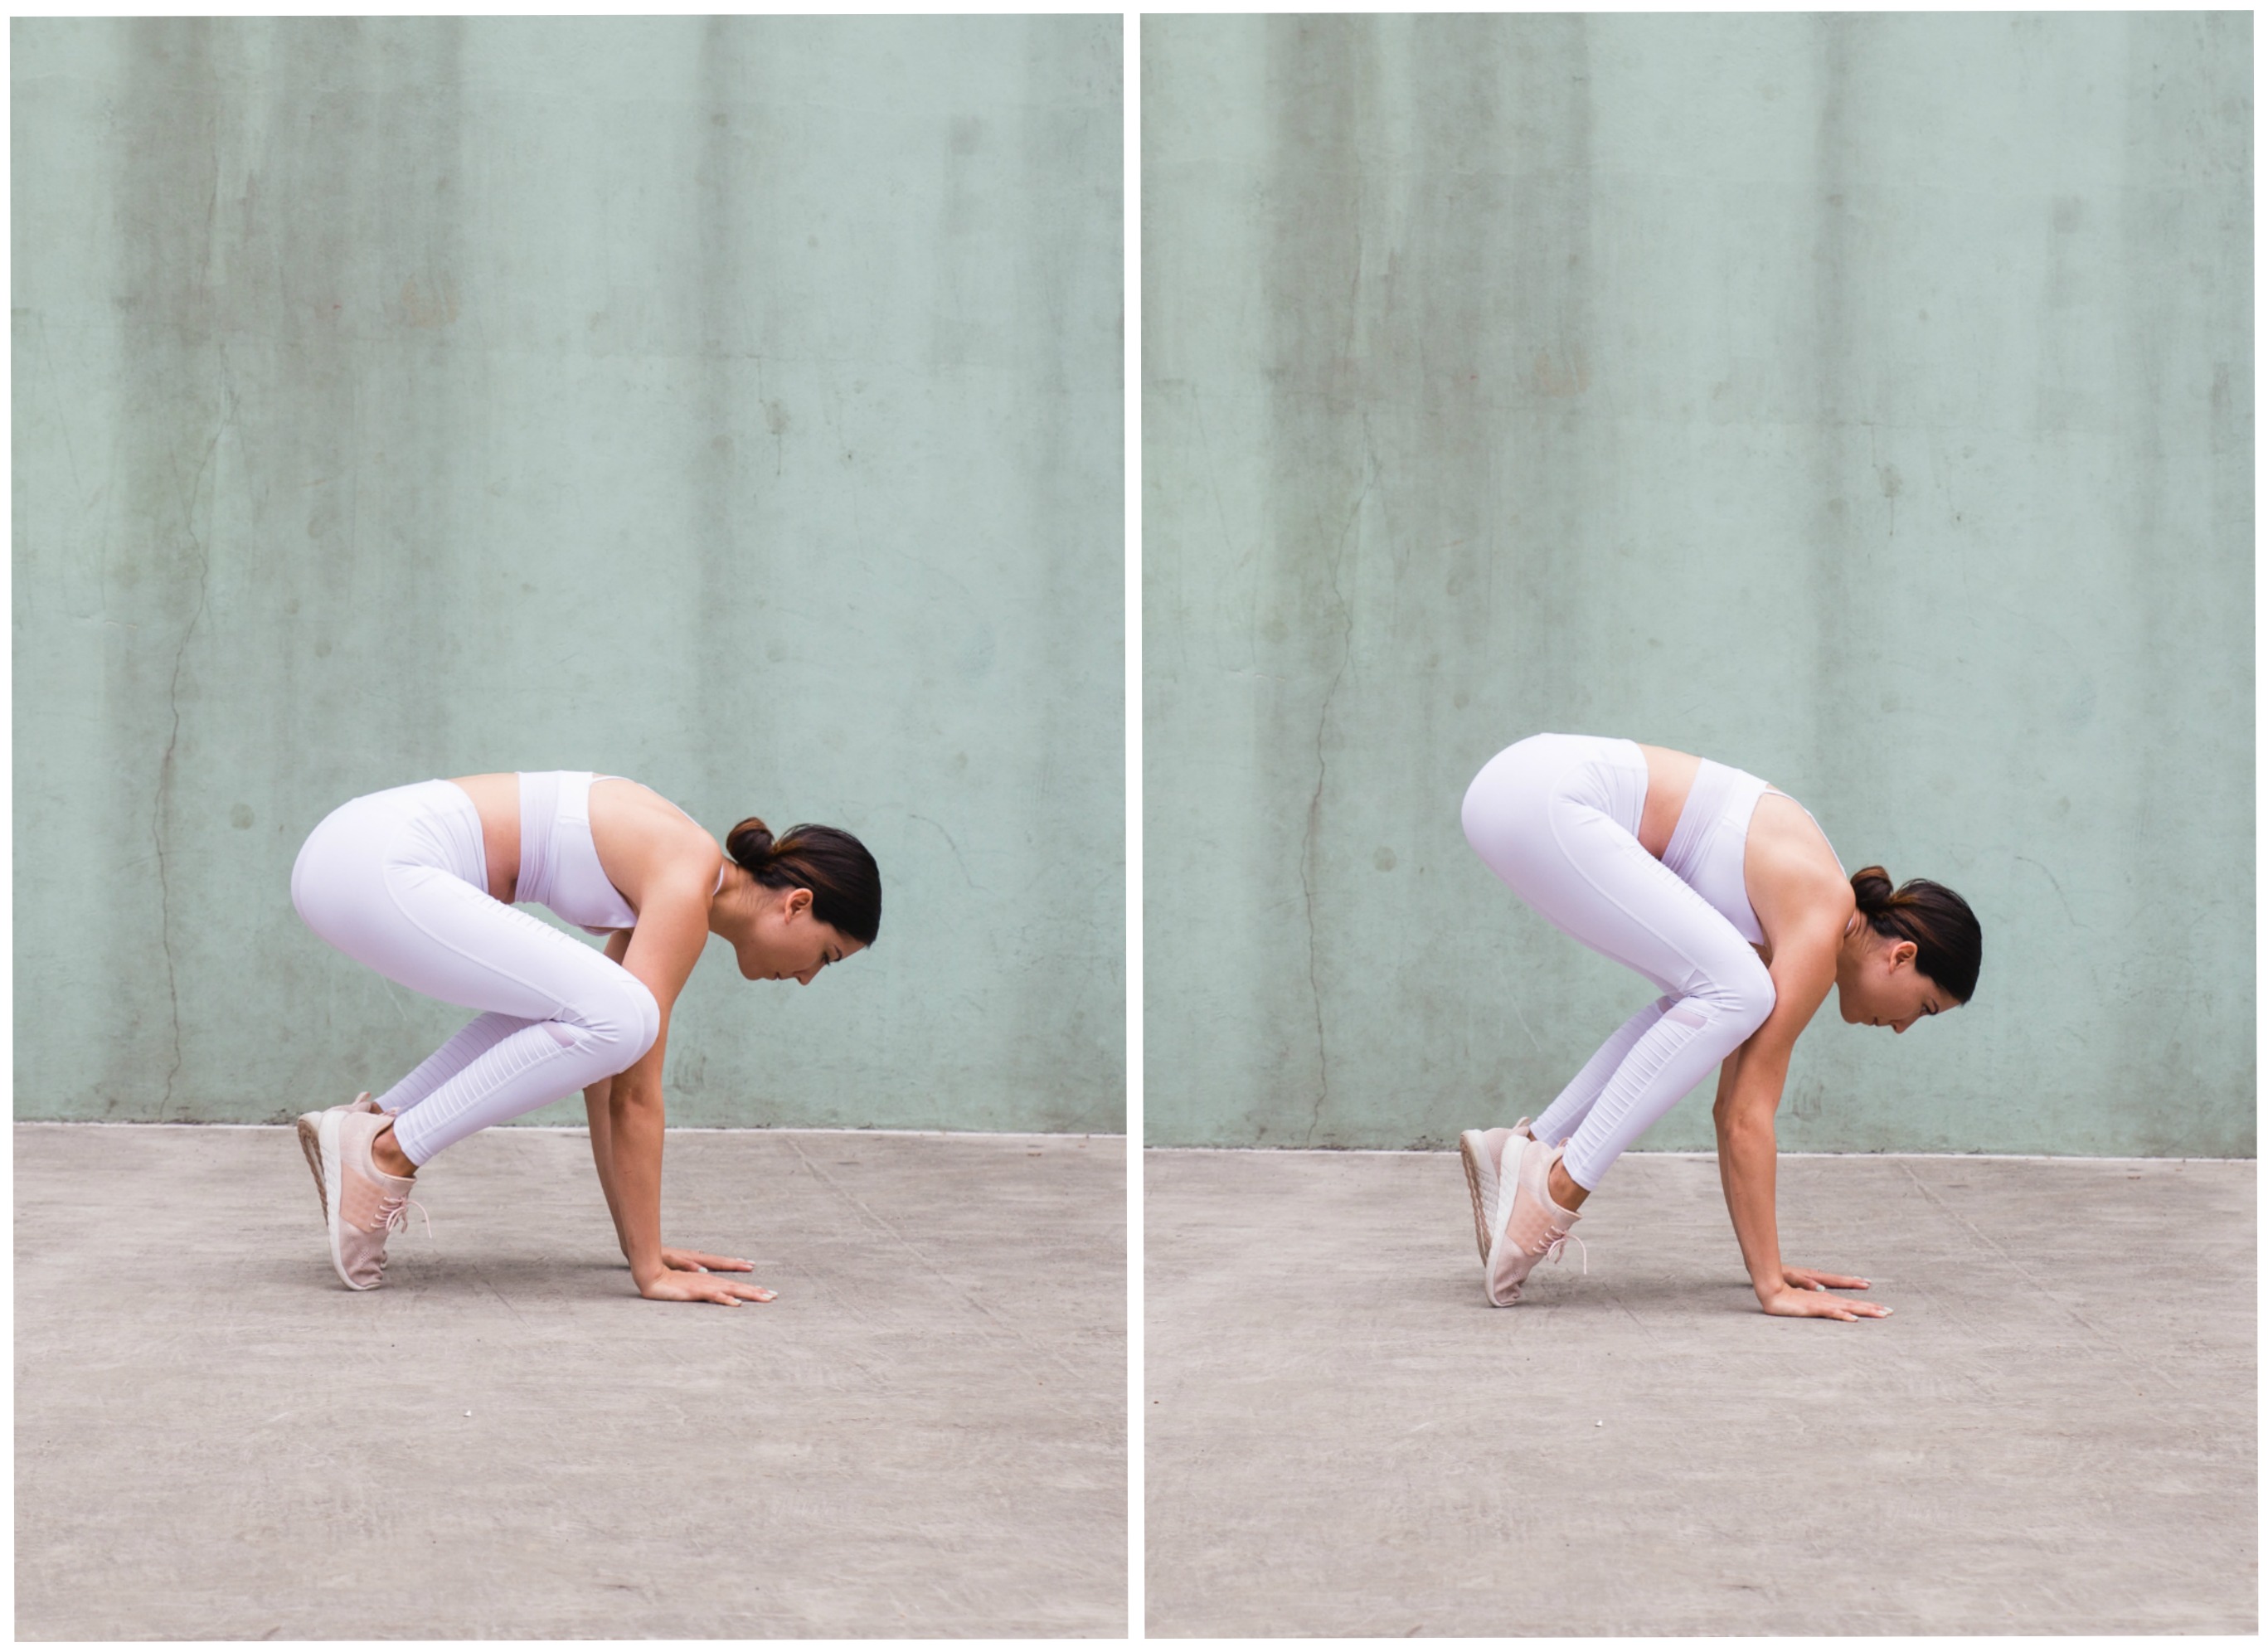 5 Tips for Getting Into Side Crow Pose — Pen + Keyboard